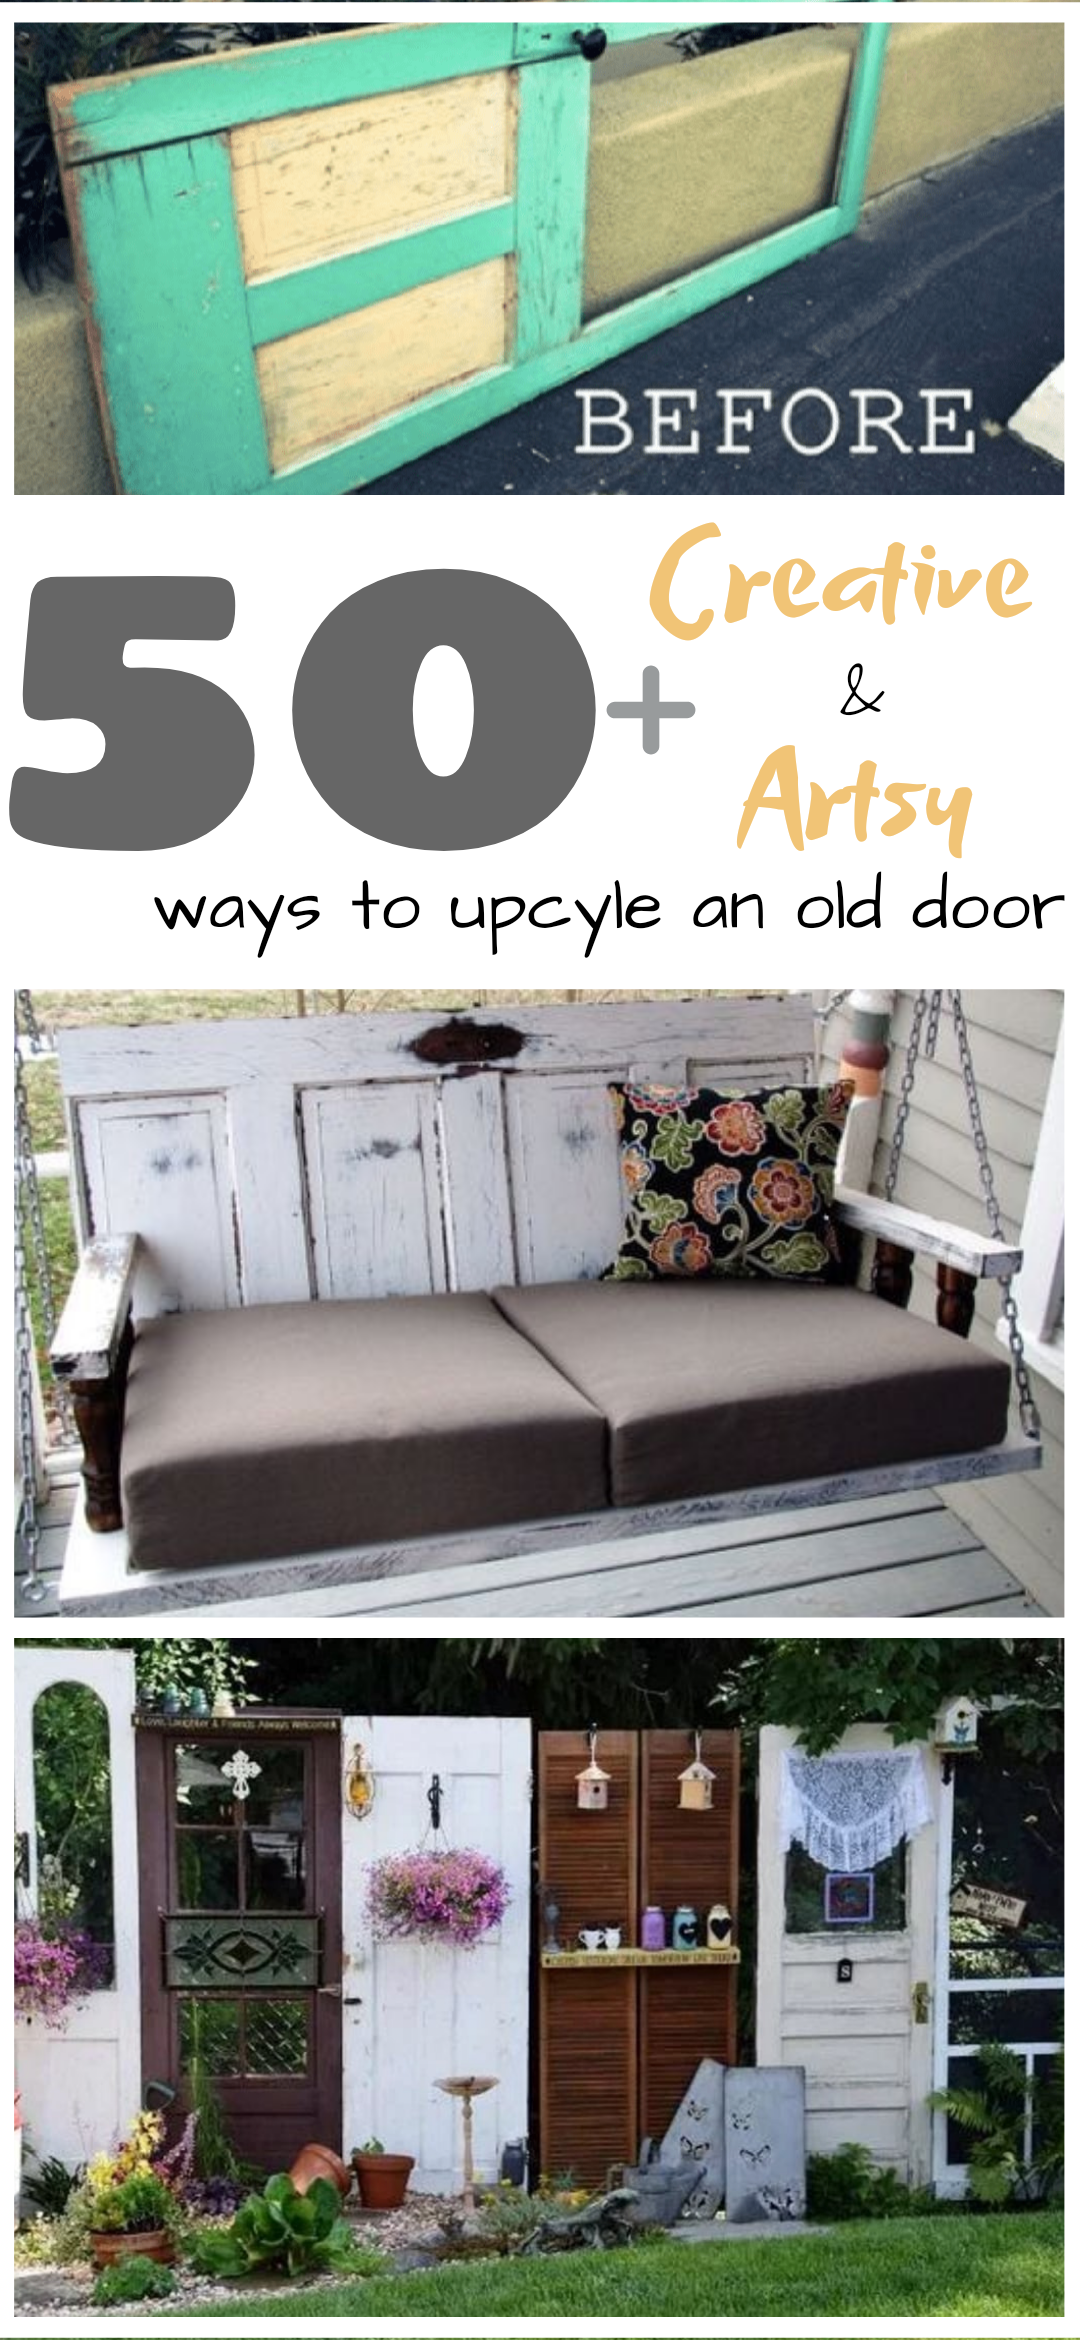 50+ creative and artsy ways to upcyle an old door -   15 diy projects For The Home hacks ideas